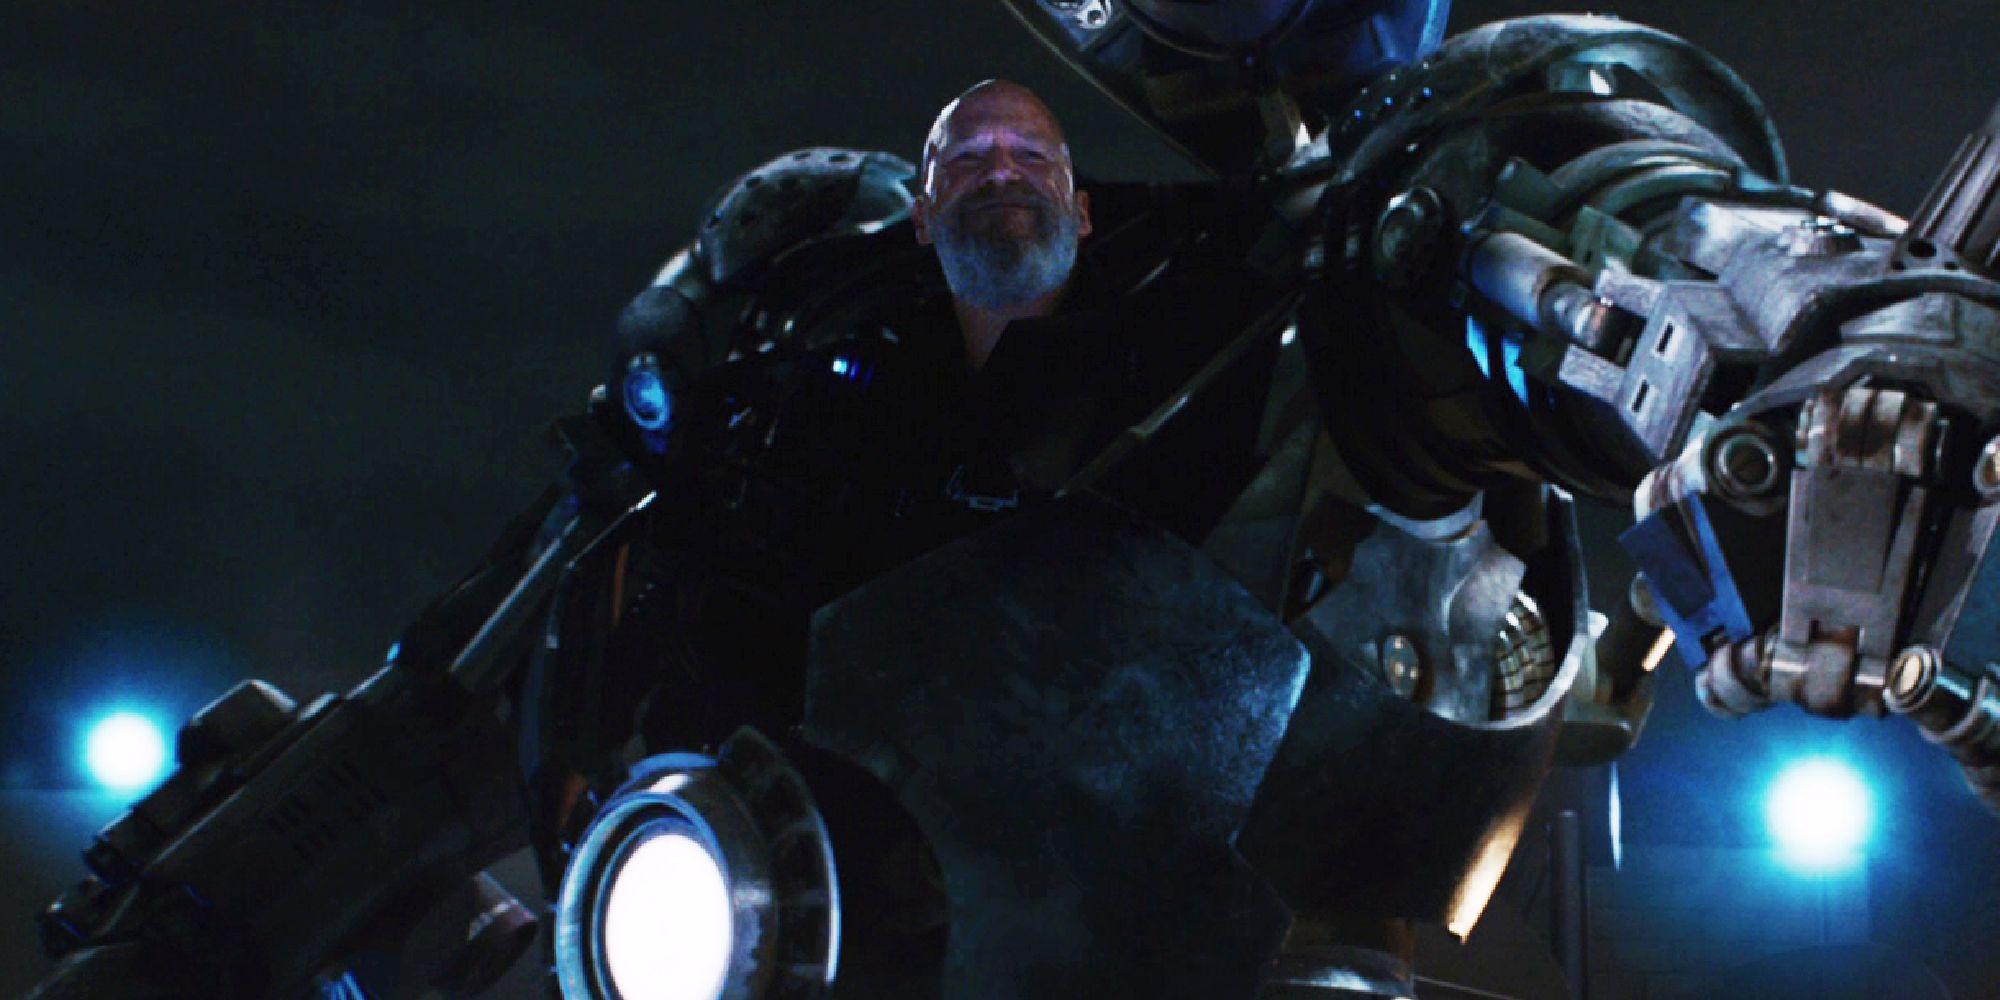 Obadiah Stane controlling the Iron Monger suit in Iron Man